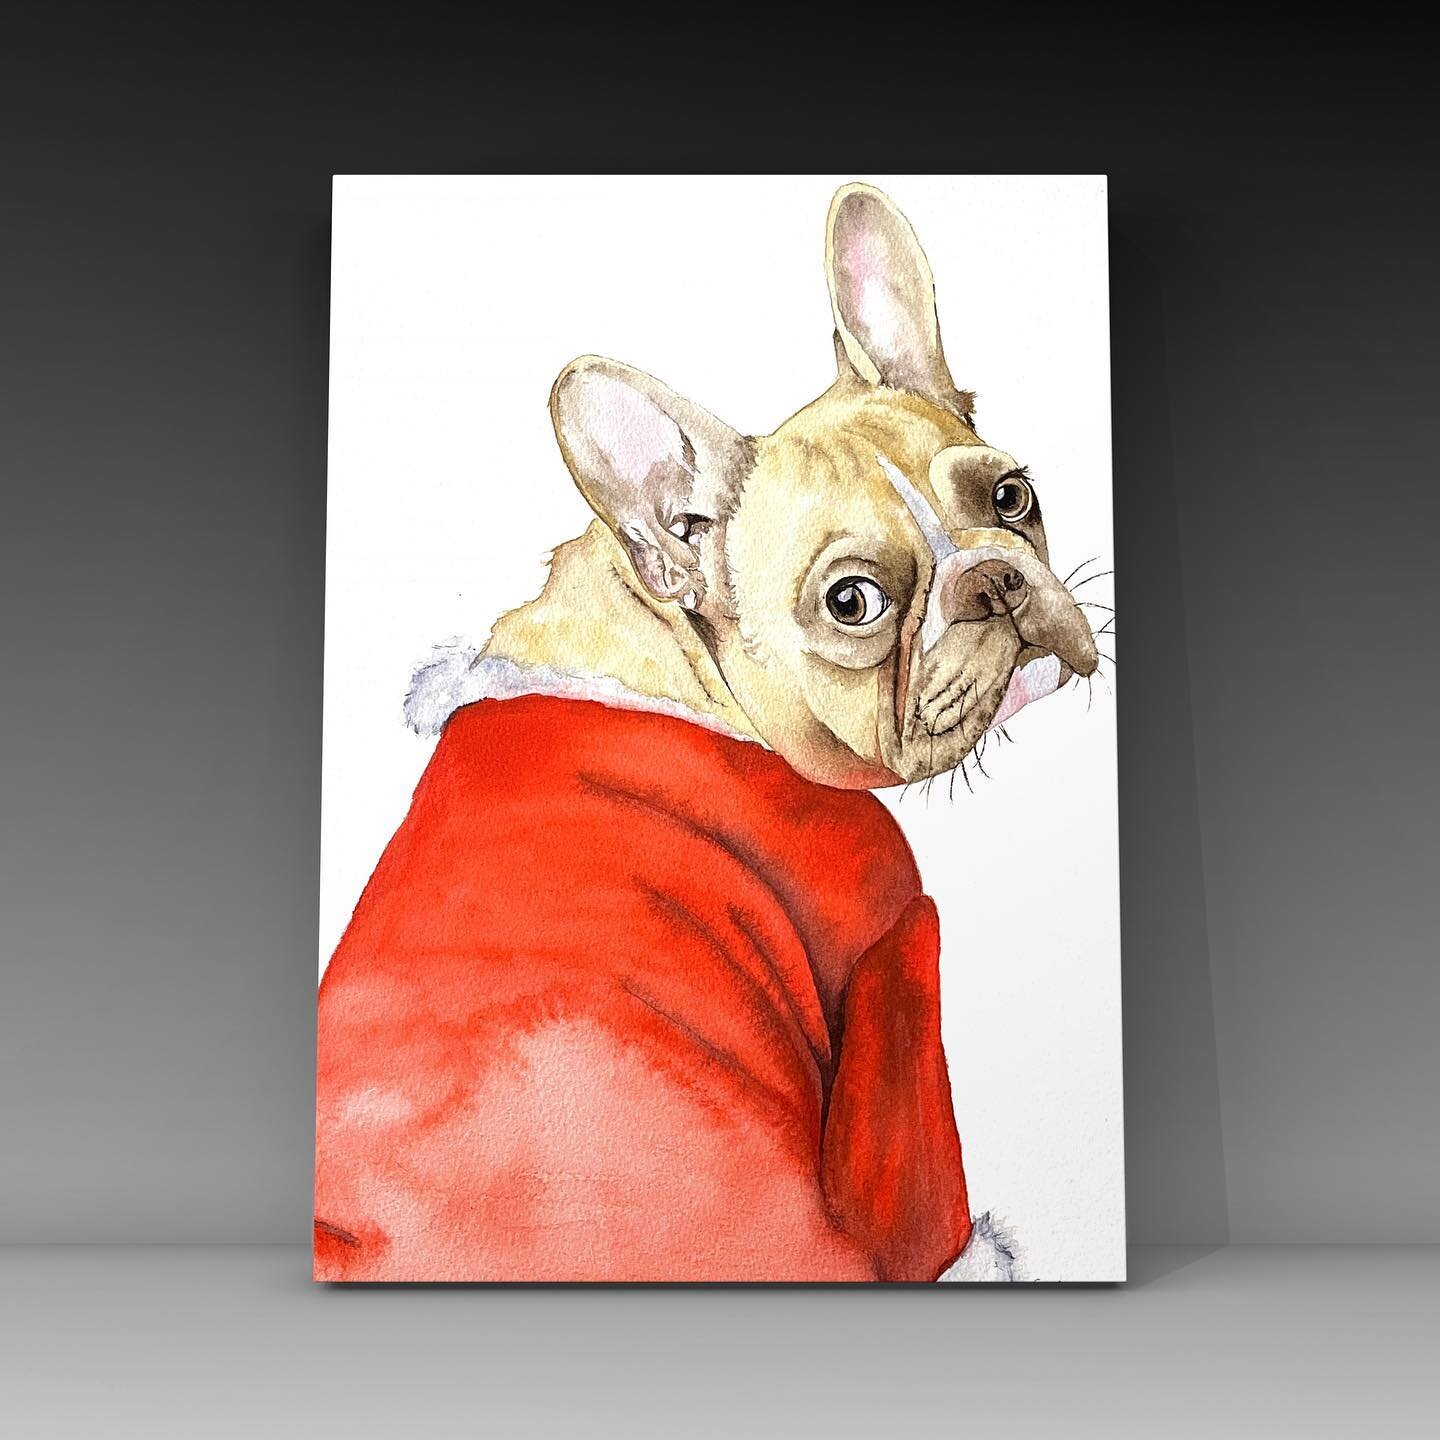 French bulldog all decked out for Christmas! #frenchbulldog #watercolorpainting #watercolorart #louisedemasi #unsplash #art-for-arts-sake